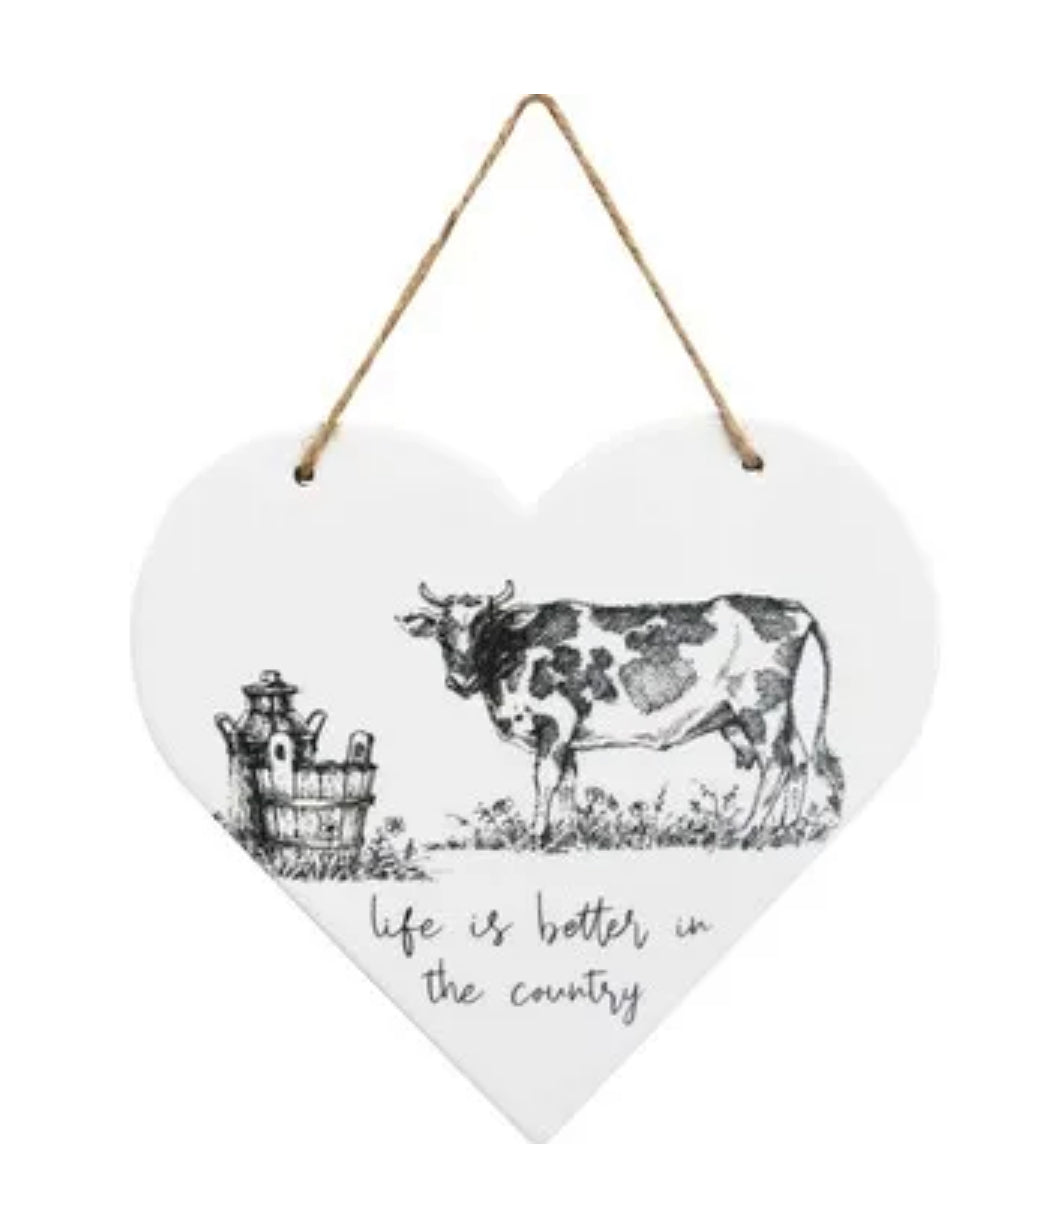 ‘Life Is Better’ Ceramic Hanging Heart